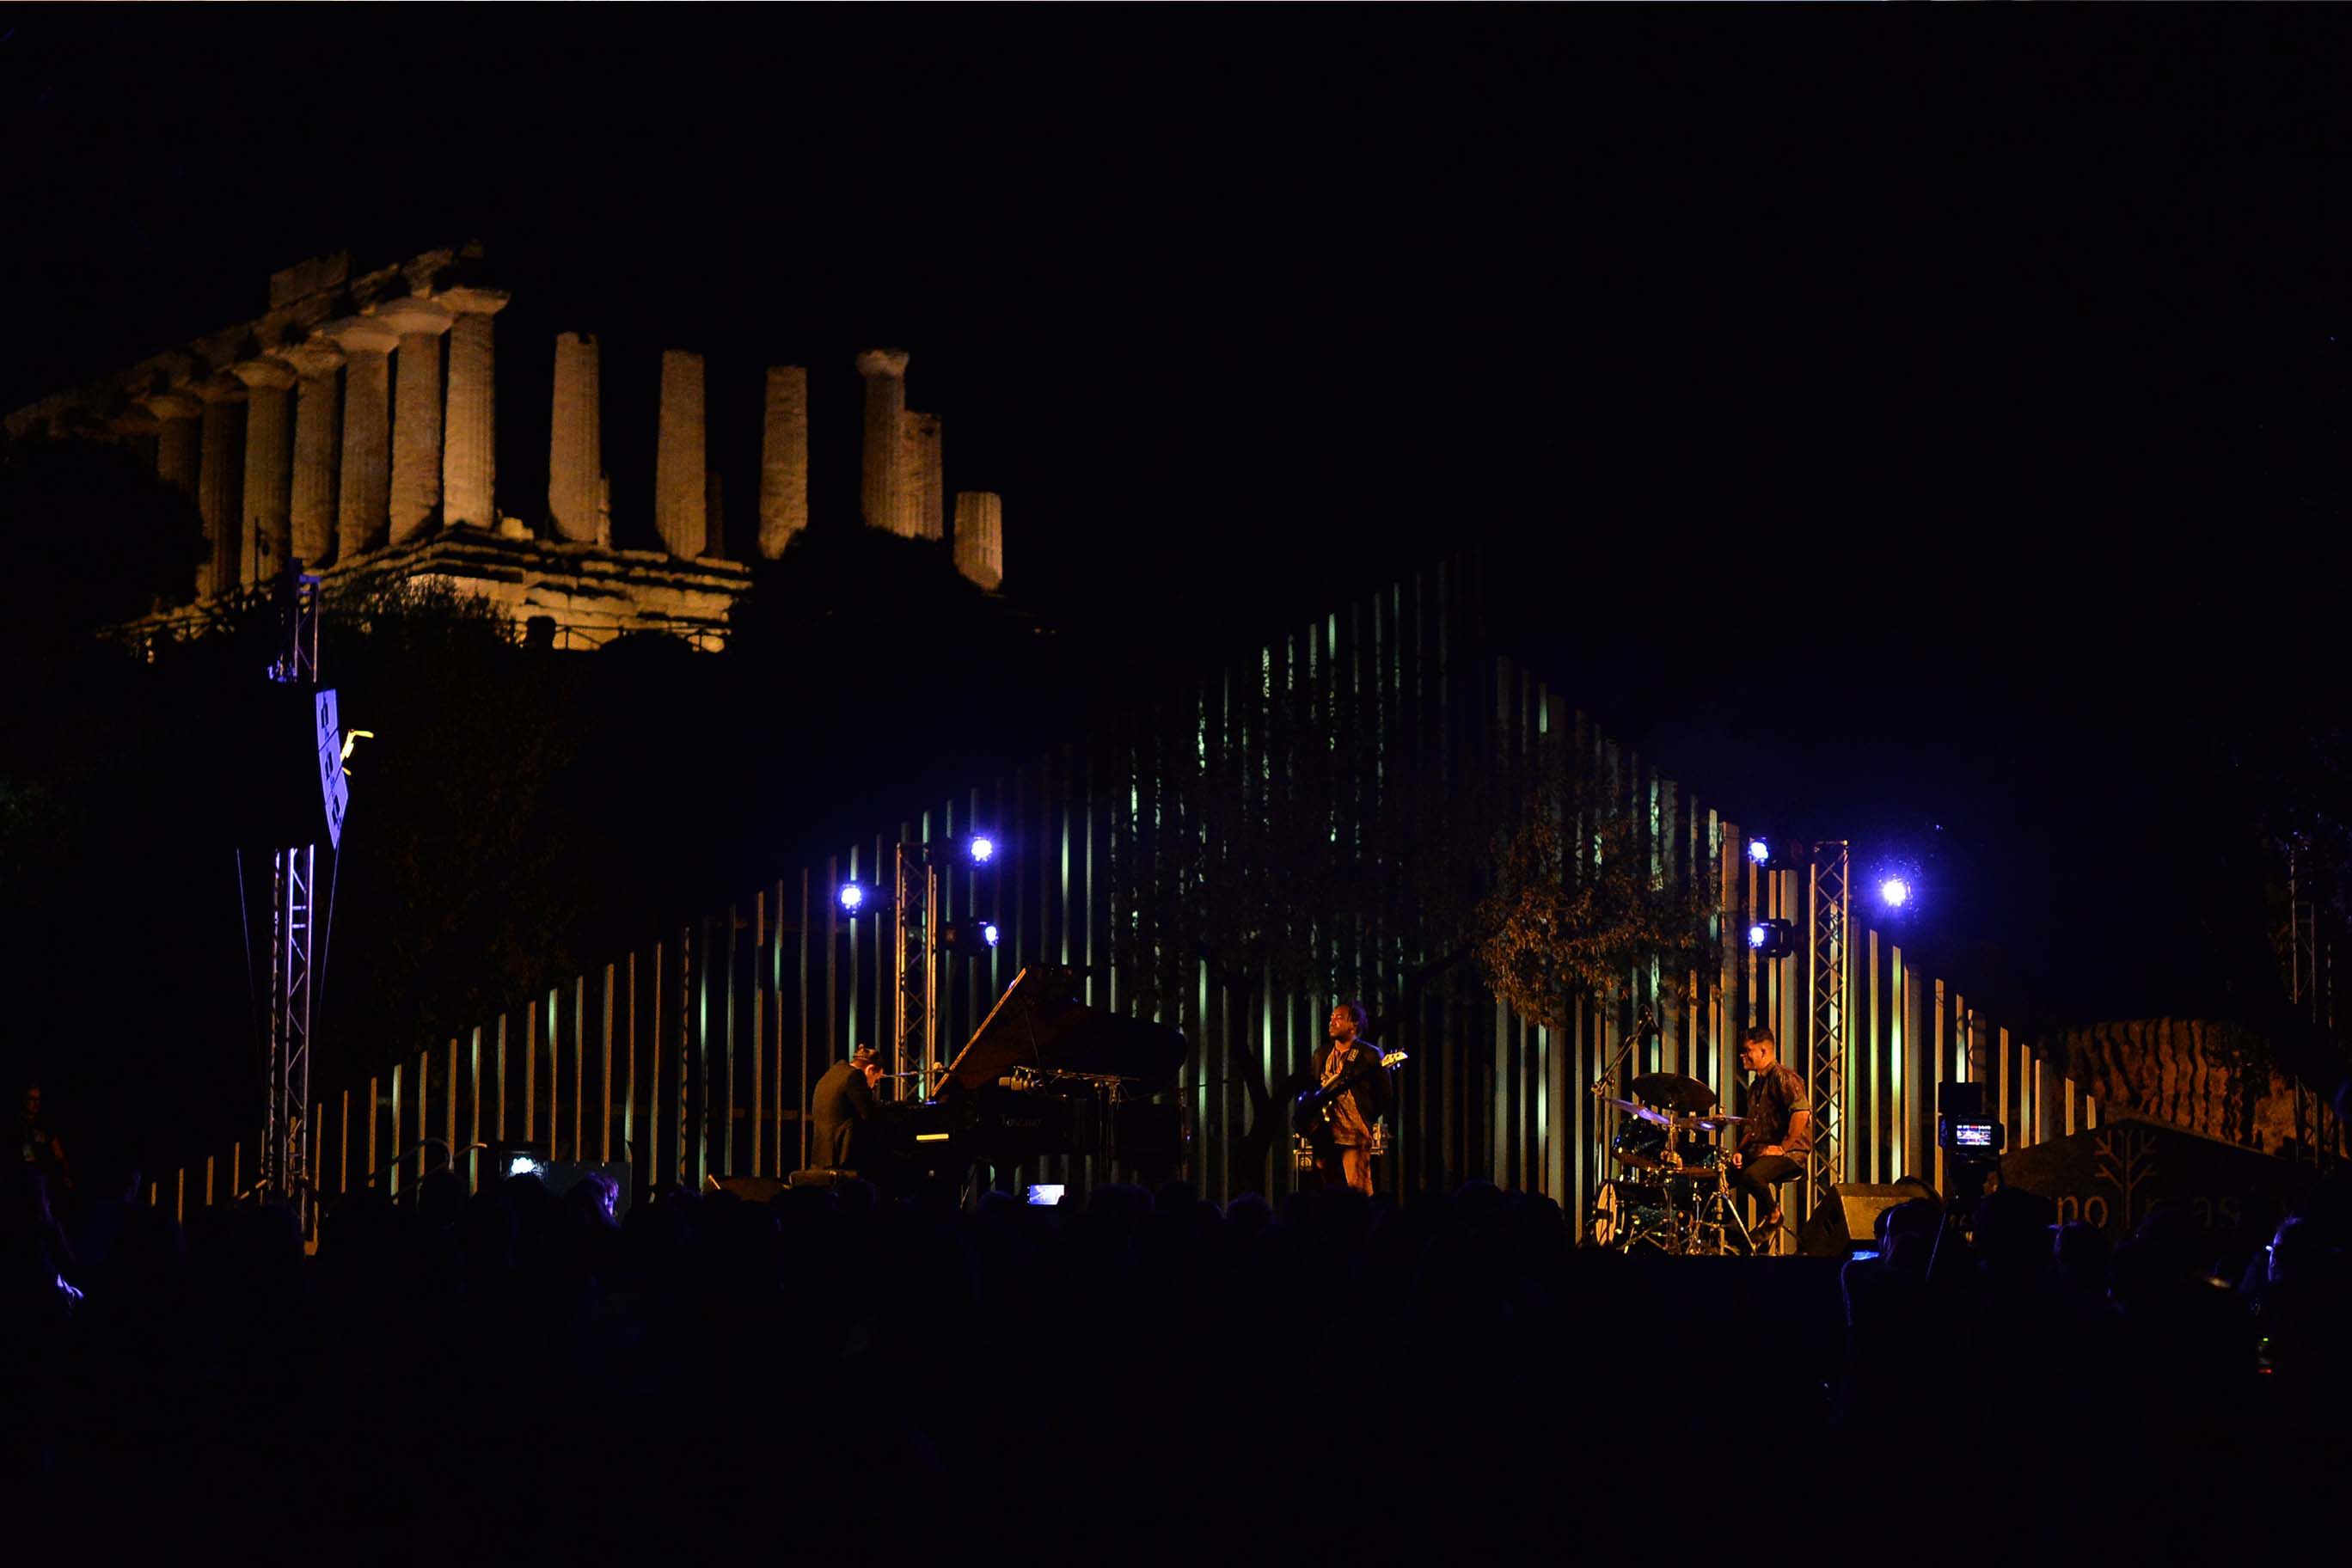 It is dark, in an open space in the background there are ancient ruins, a temple with columns lit by lighthouses. In the foreground a band of musicians on an illuminated stage with a seated audience in front in the dark. 